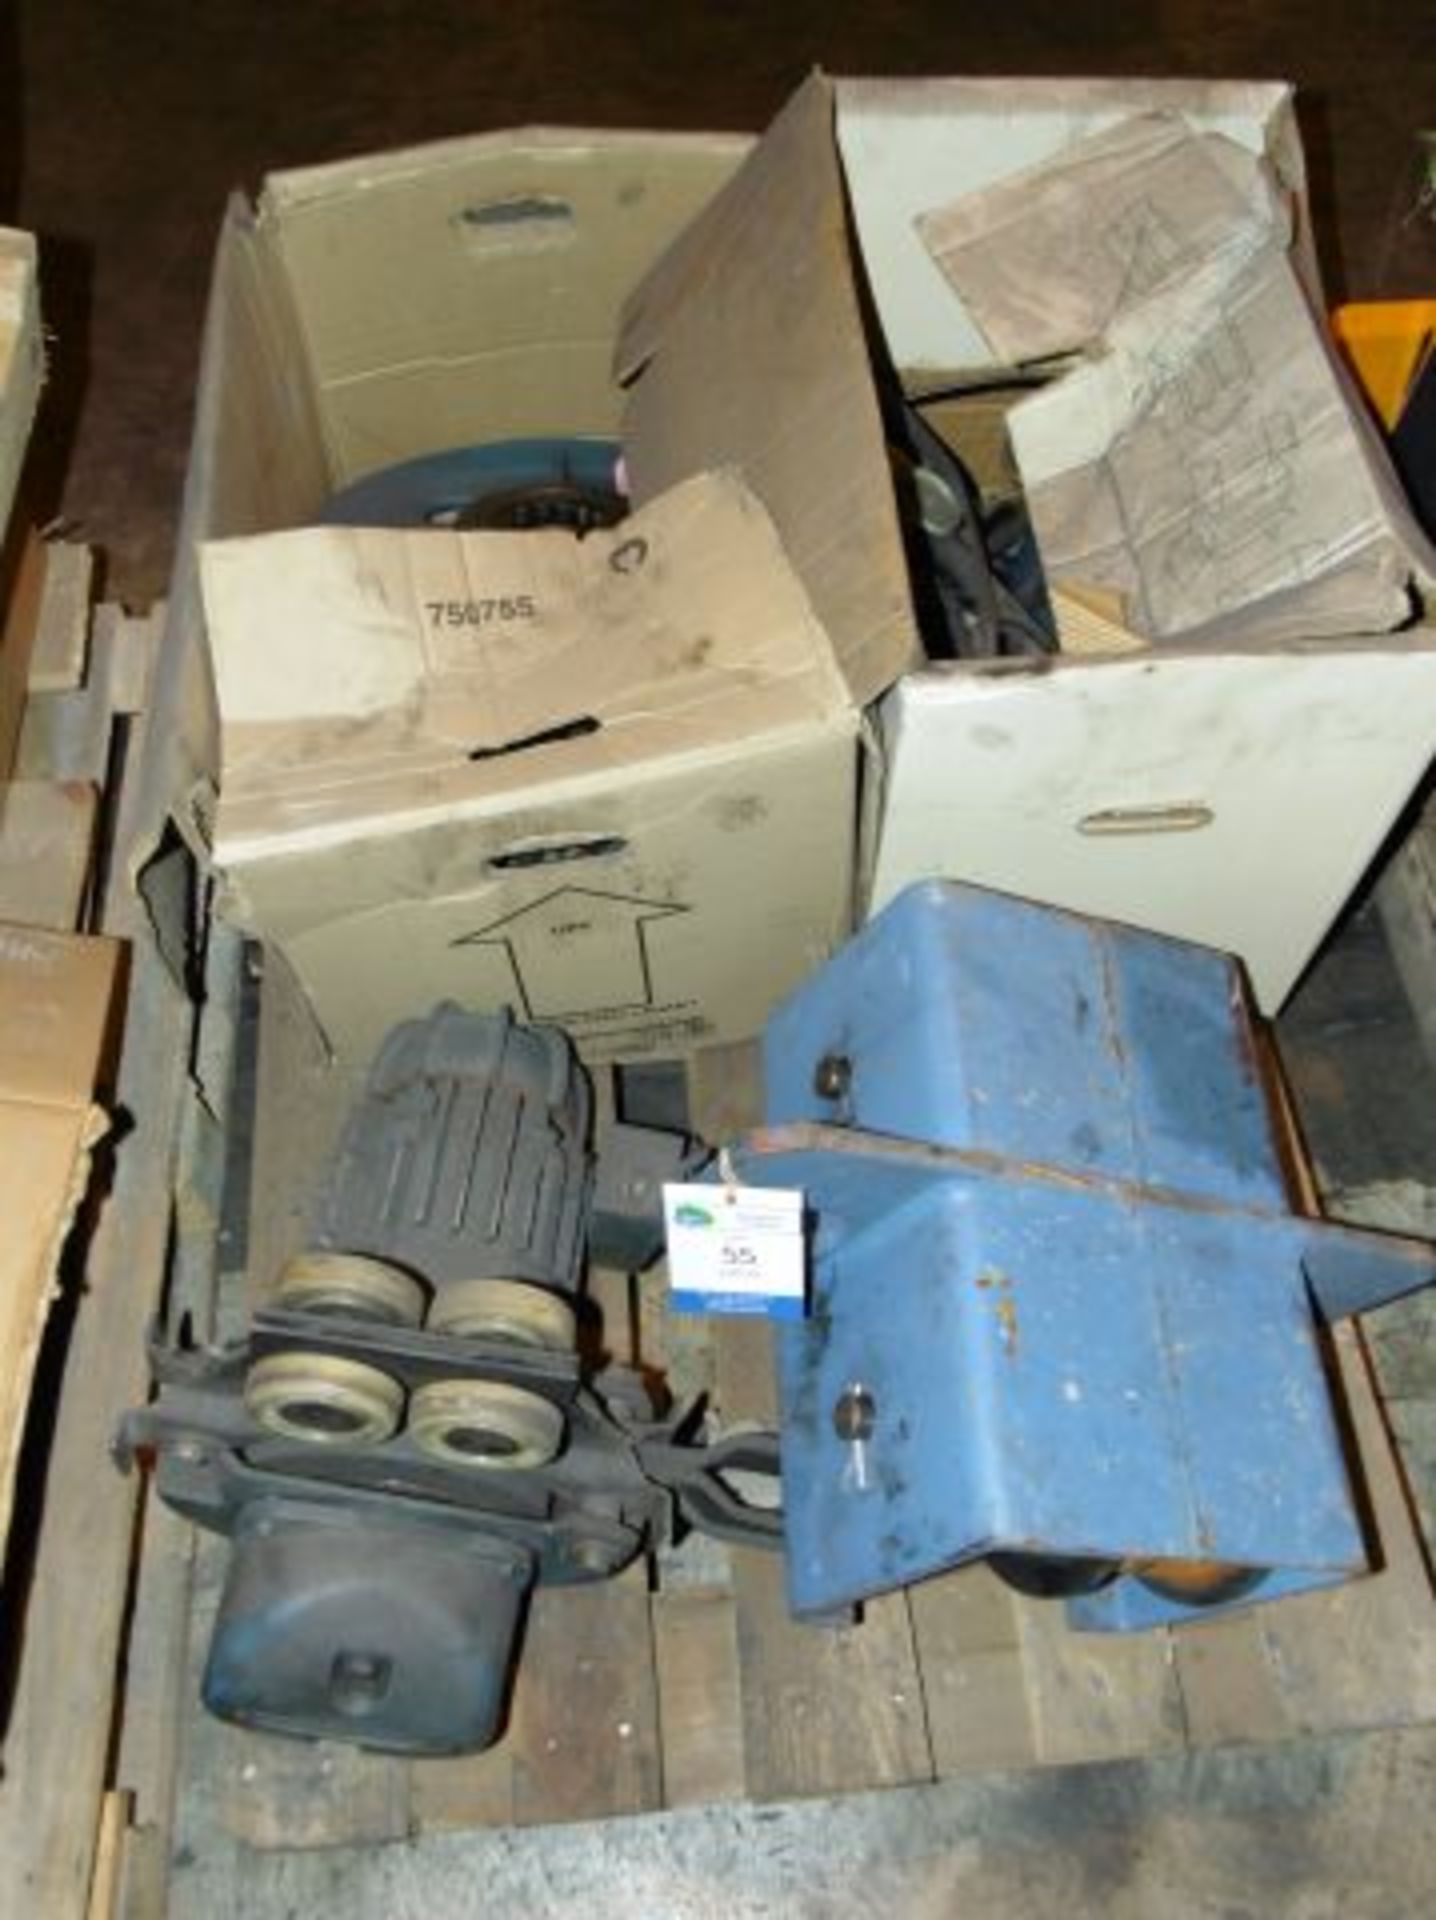 Pallet of assorted Crane Spares including Wheels, Demag Electric Hoist & Carriages. Loaded onto